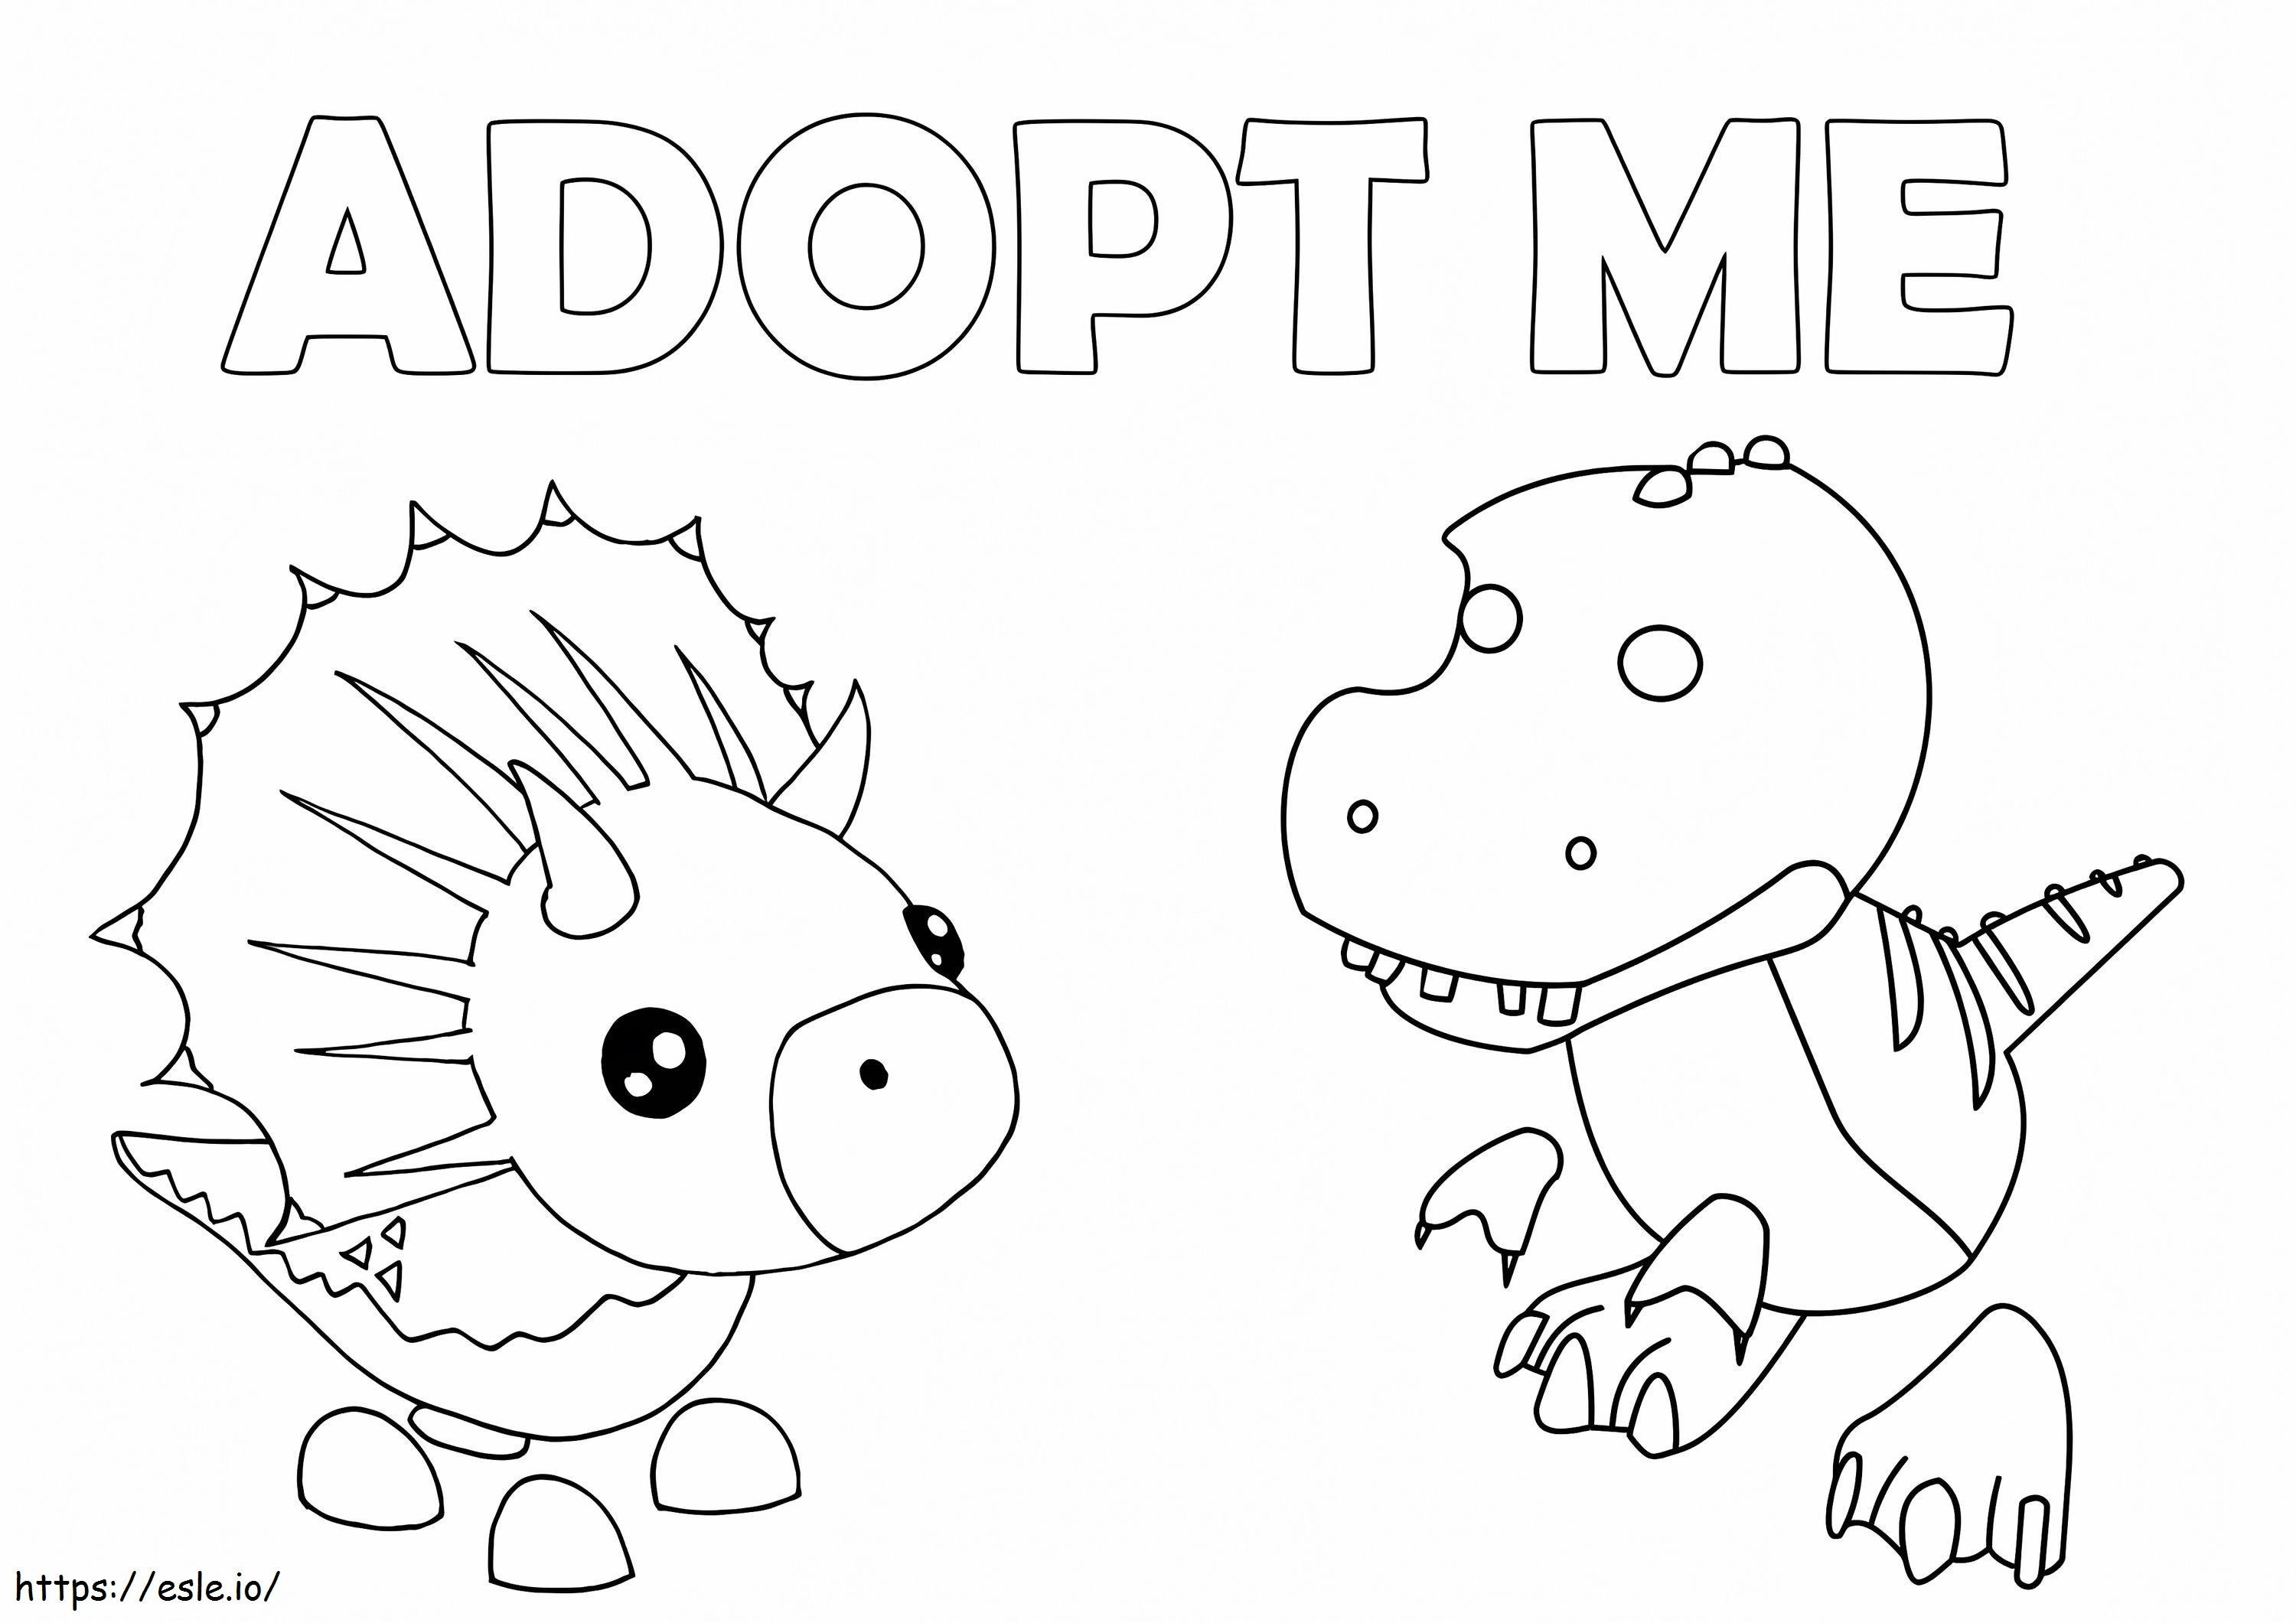 Dinosaurs Adopt Me coloring page